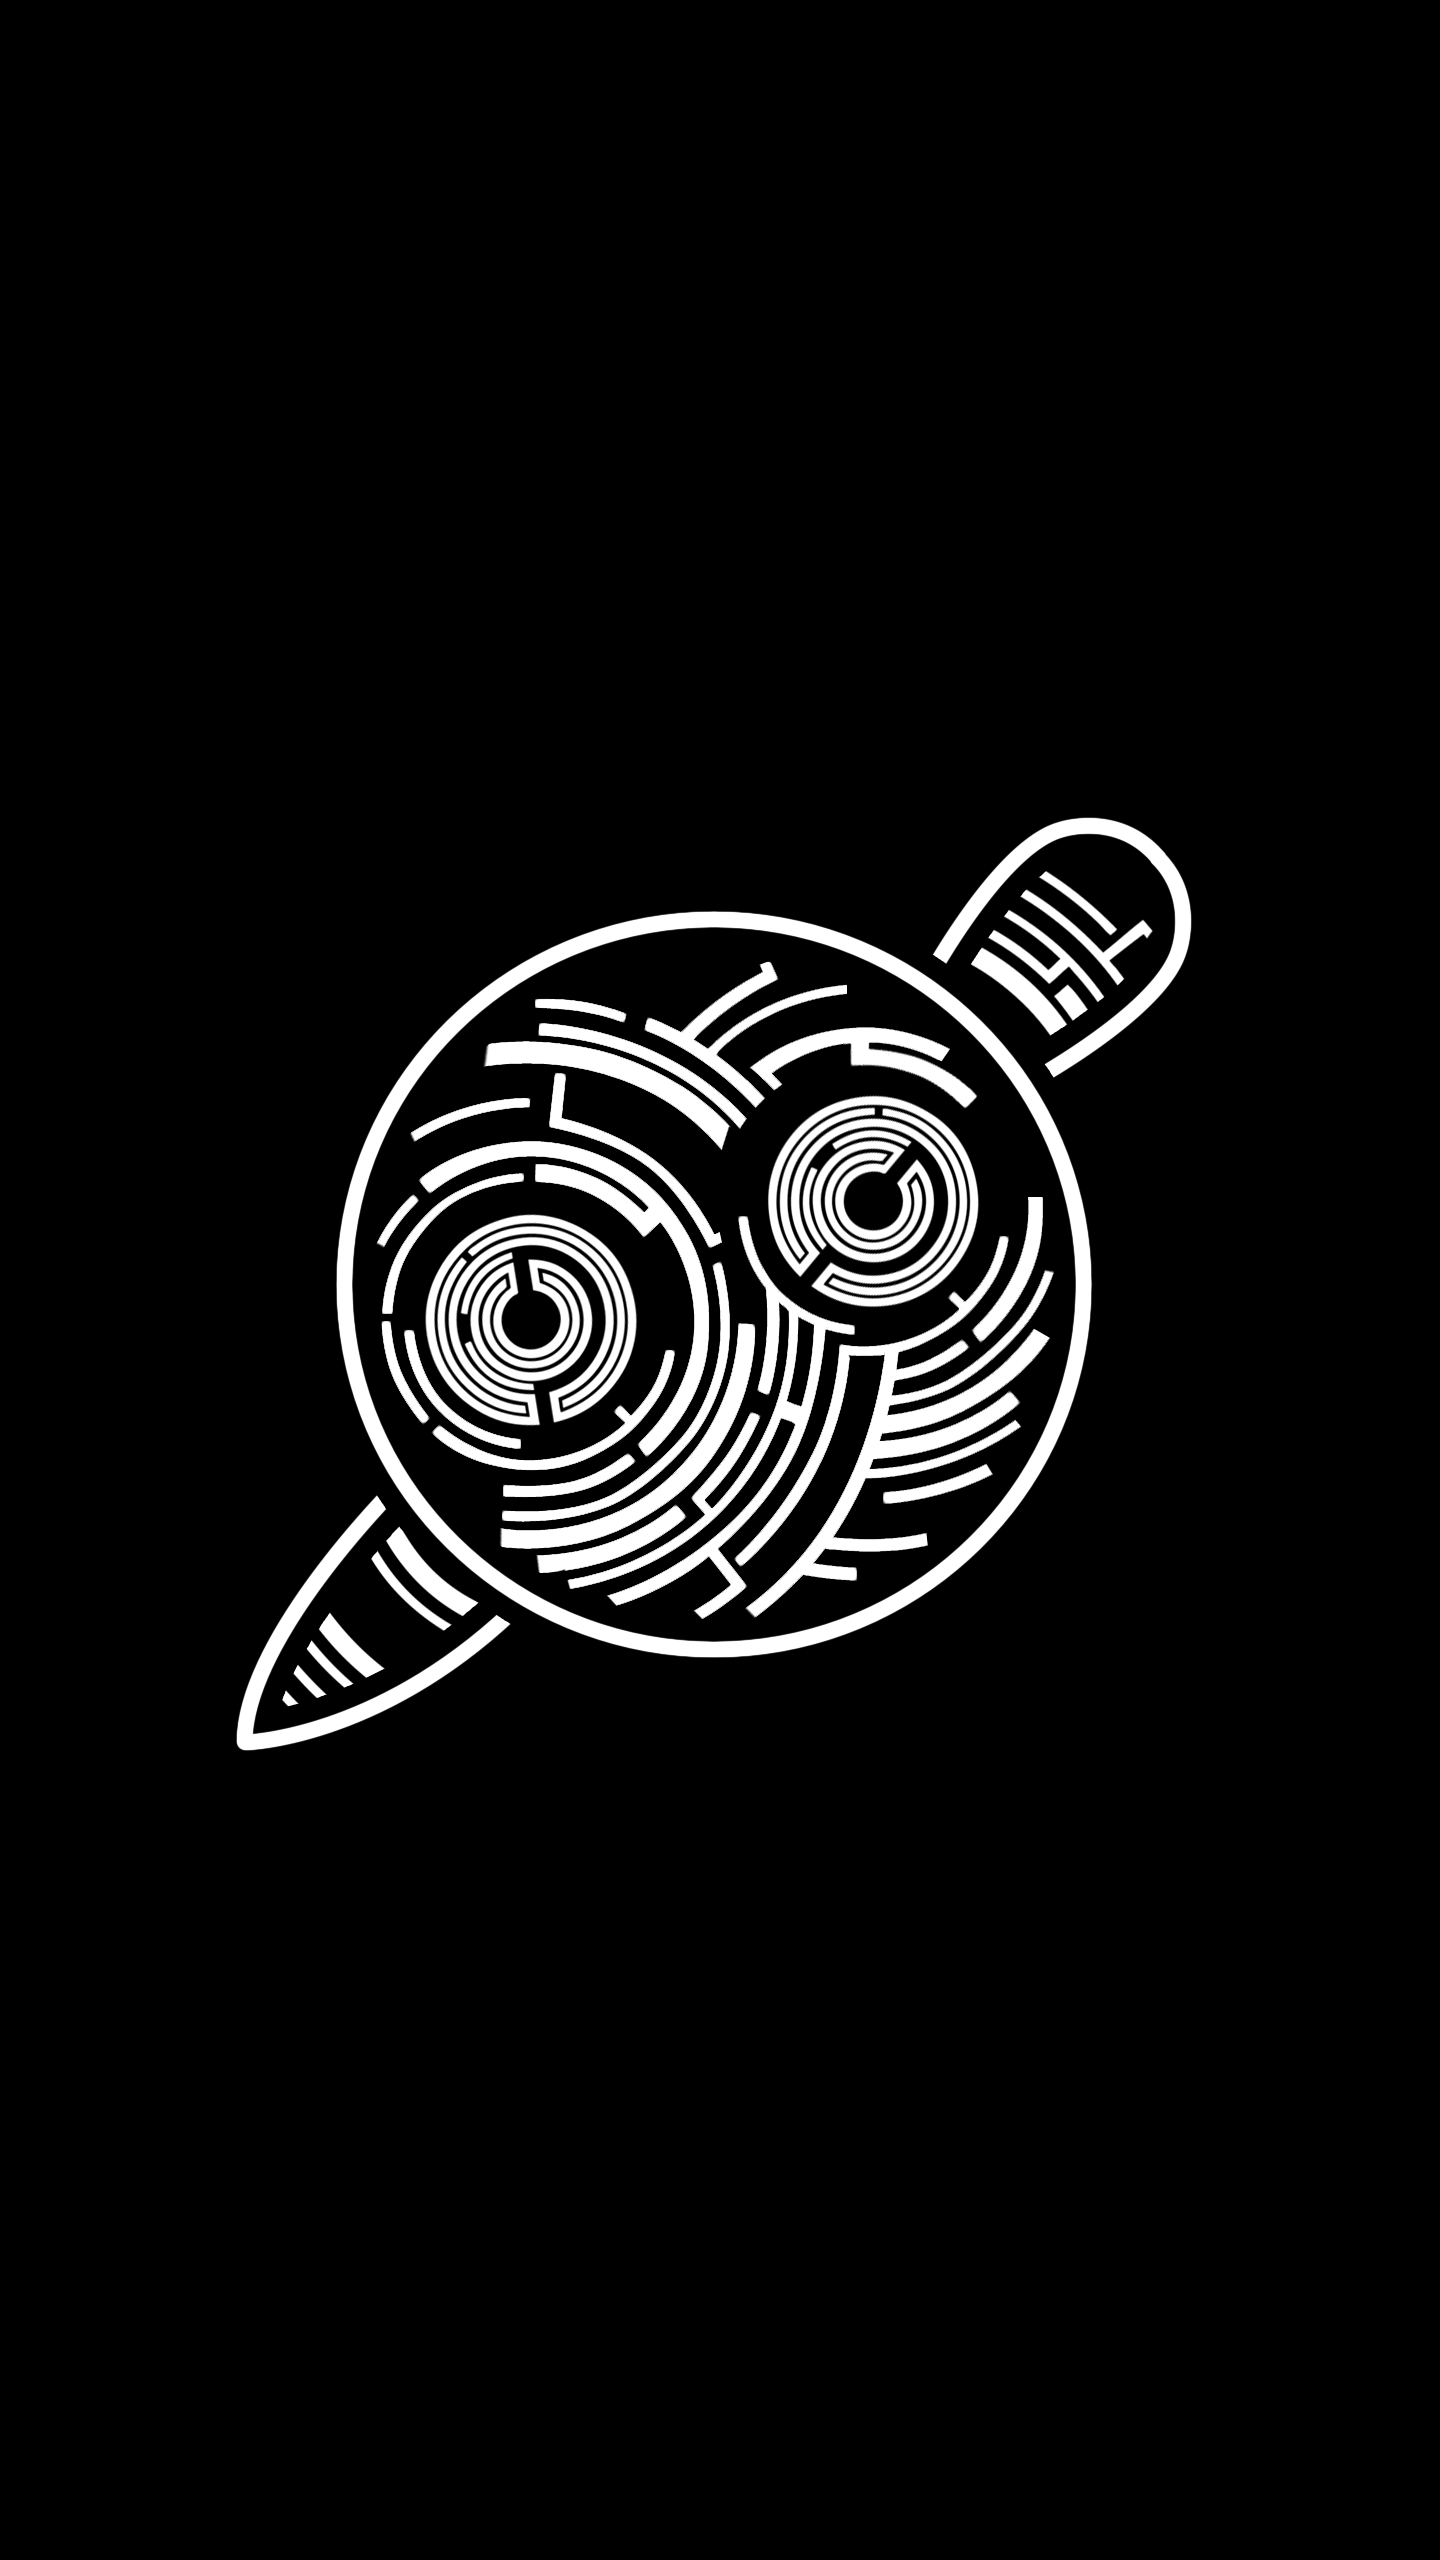 Finished Up That Pendulum Knife Party Logo Mashup Thing. Here's A